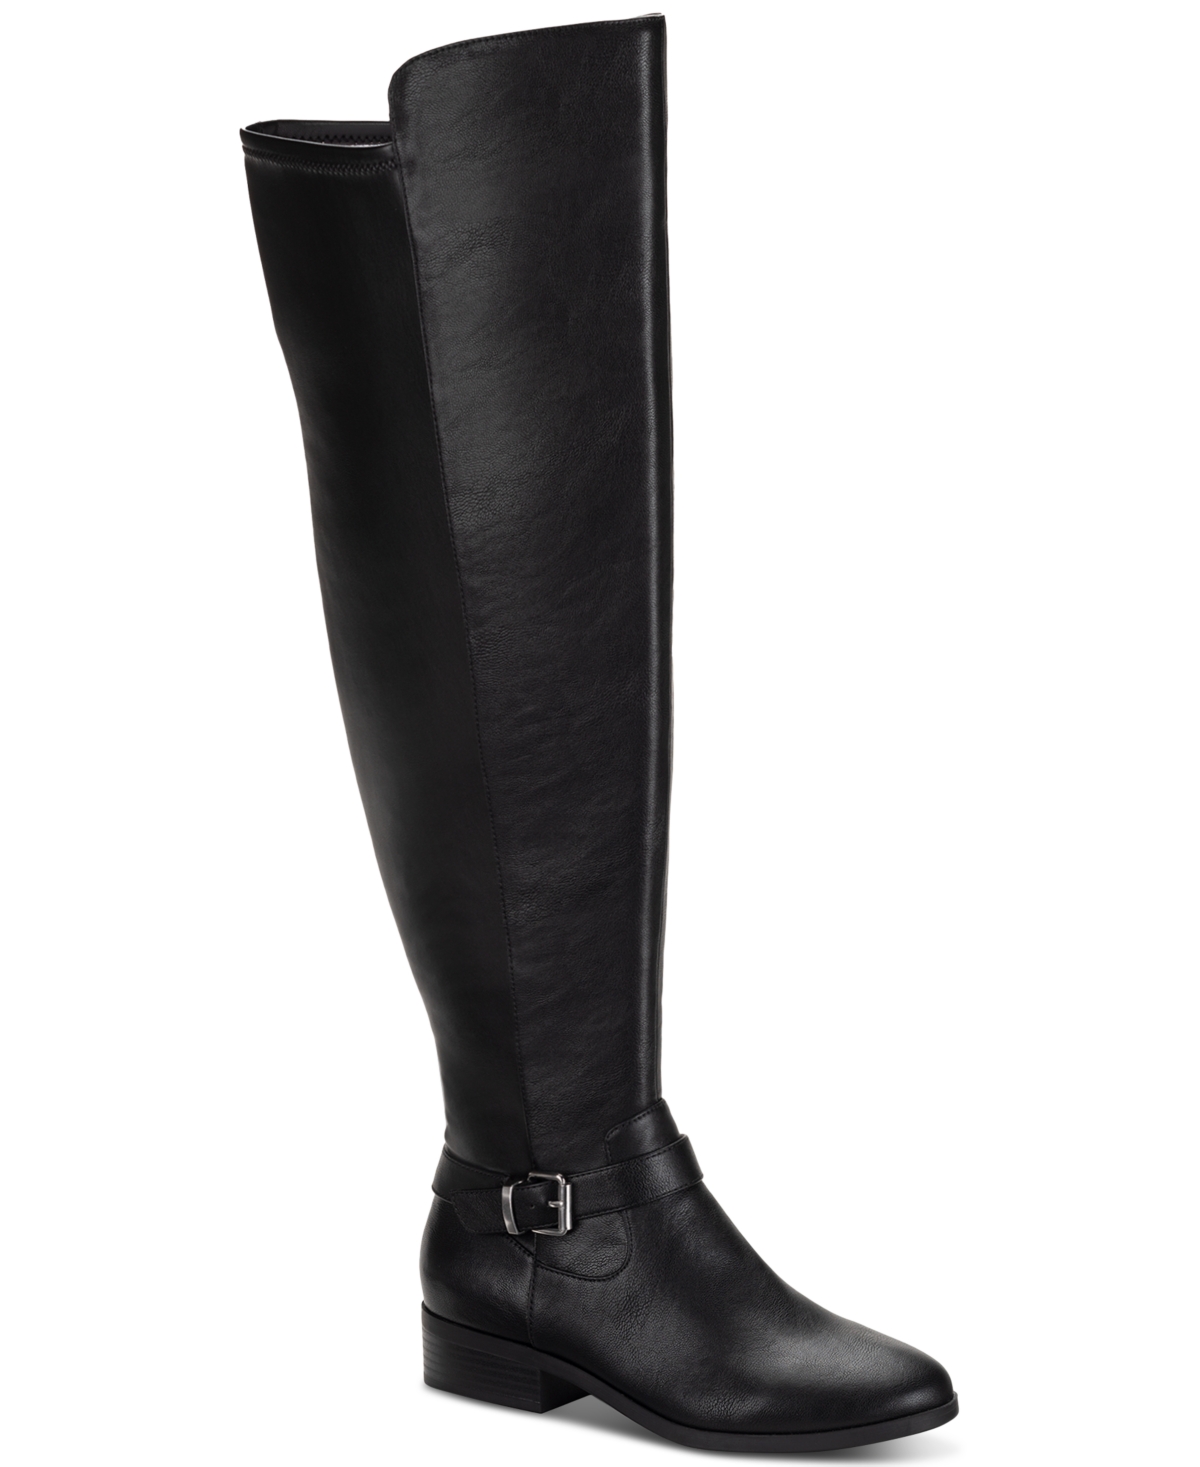 Women's Charlaa Buckled Over-The-Knee Boots, Created for Macy's - Cognac Smooth